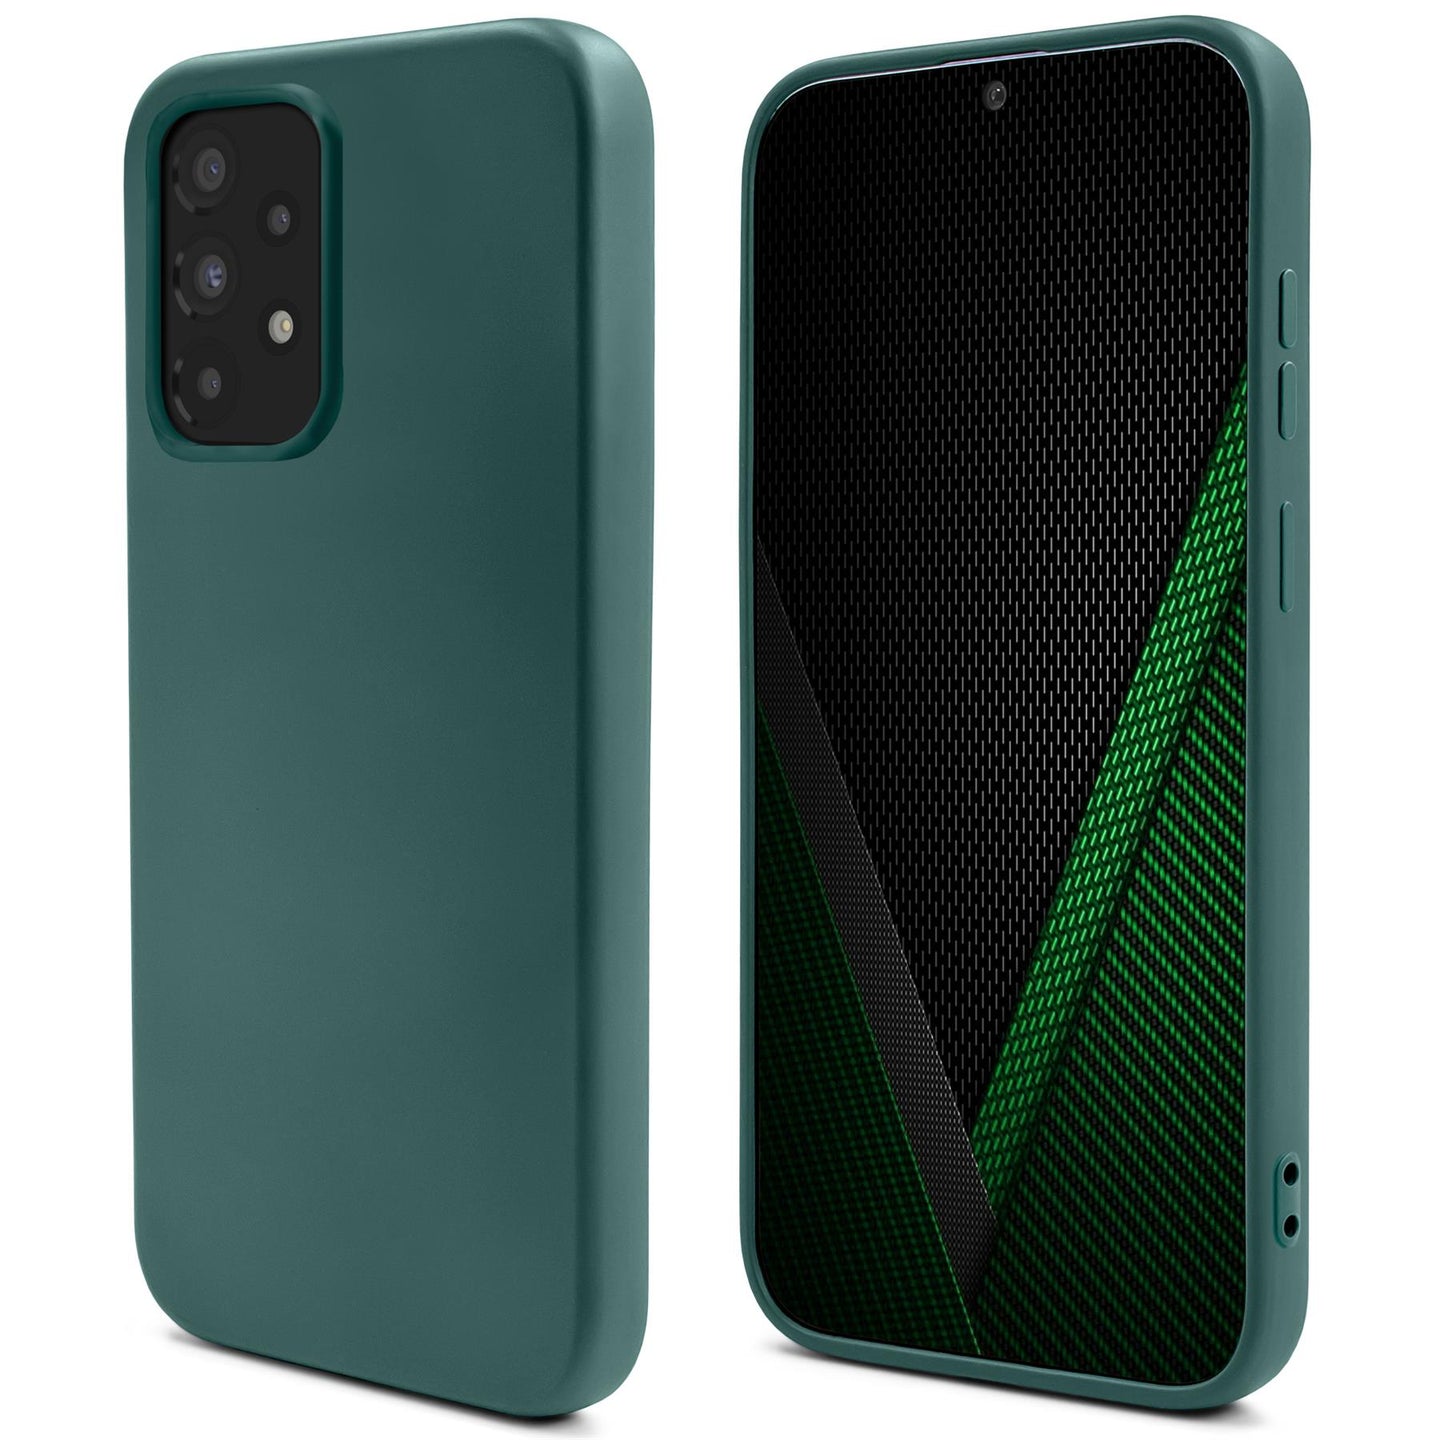 Moozy Lifestyle. Silicone Case for Samsung A33 5G, Dark Green - Liquid Silicone Lightweight Cover with Matte Finish and Soft Microfiber Lining, Premium Silicone Case